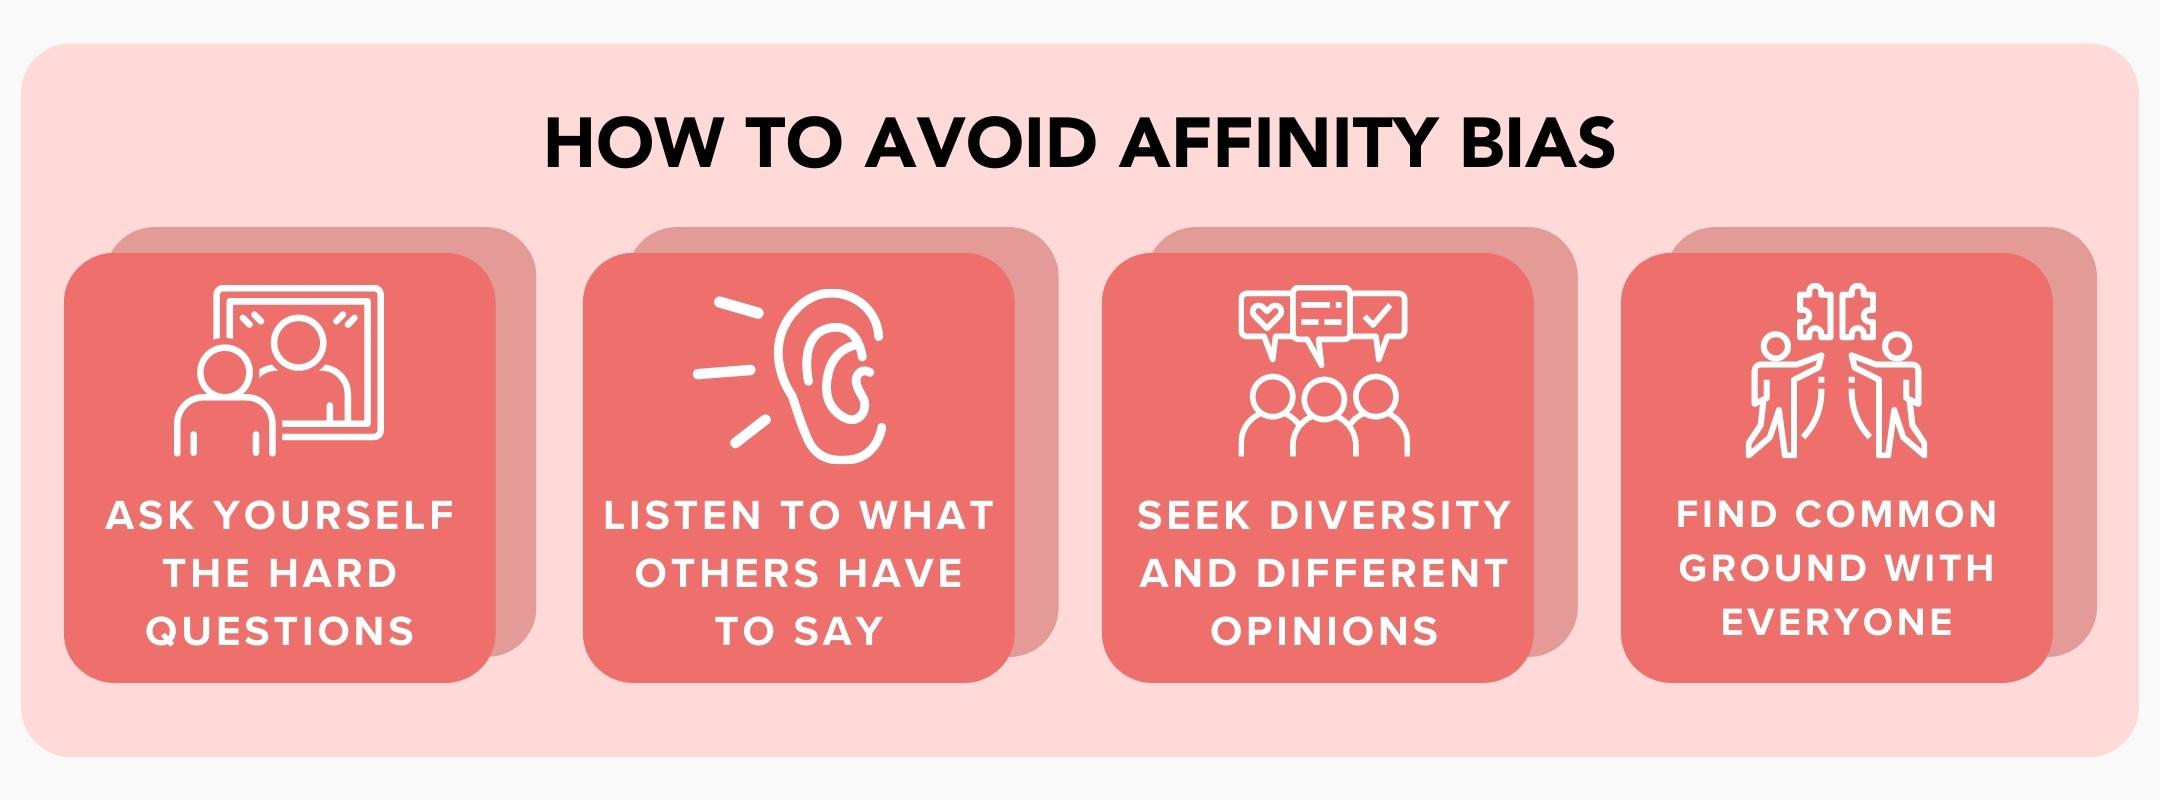 how to avoid affinity bias